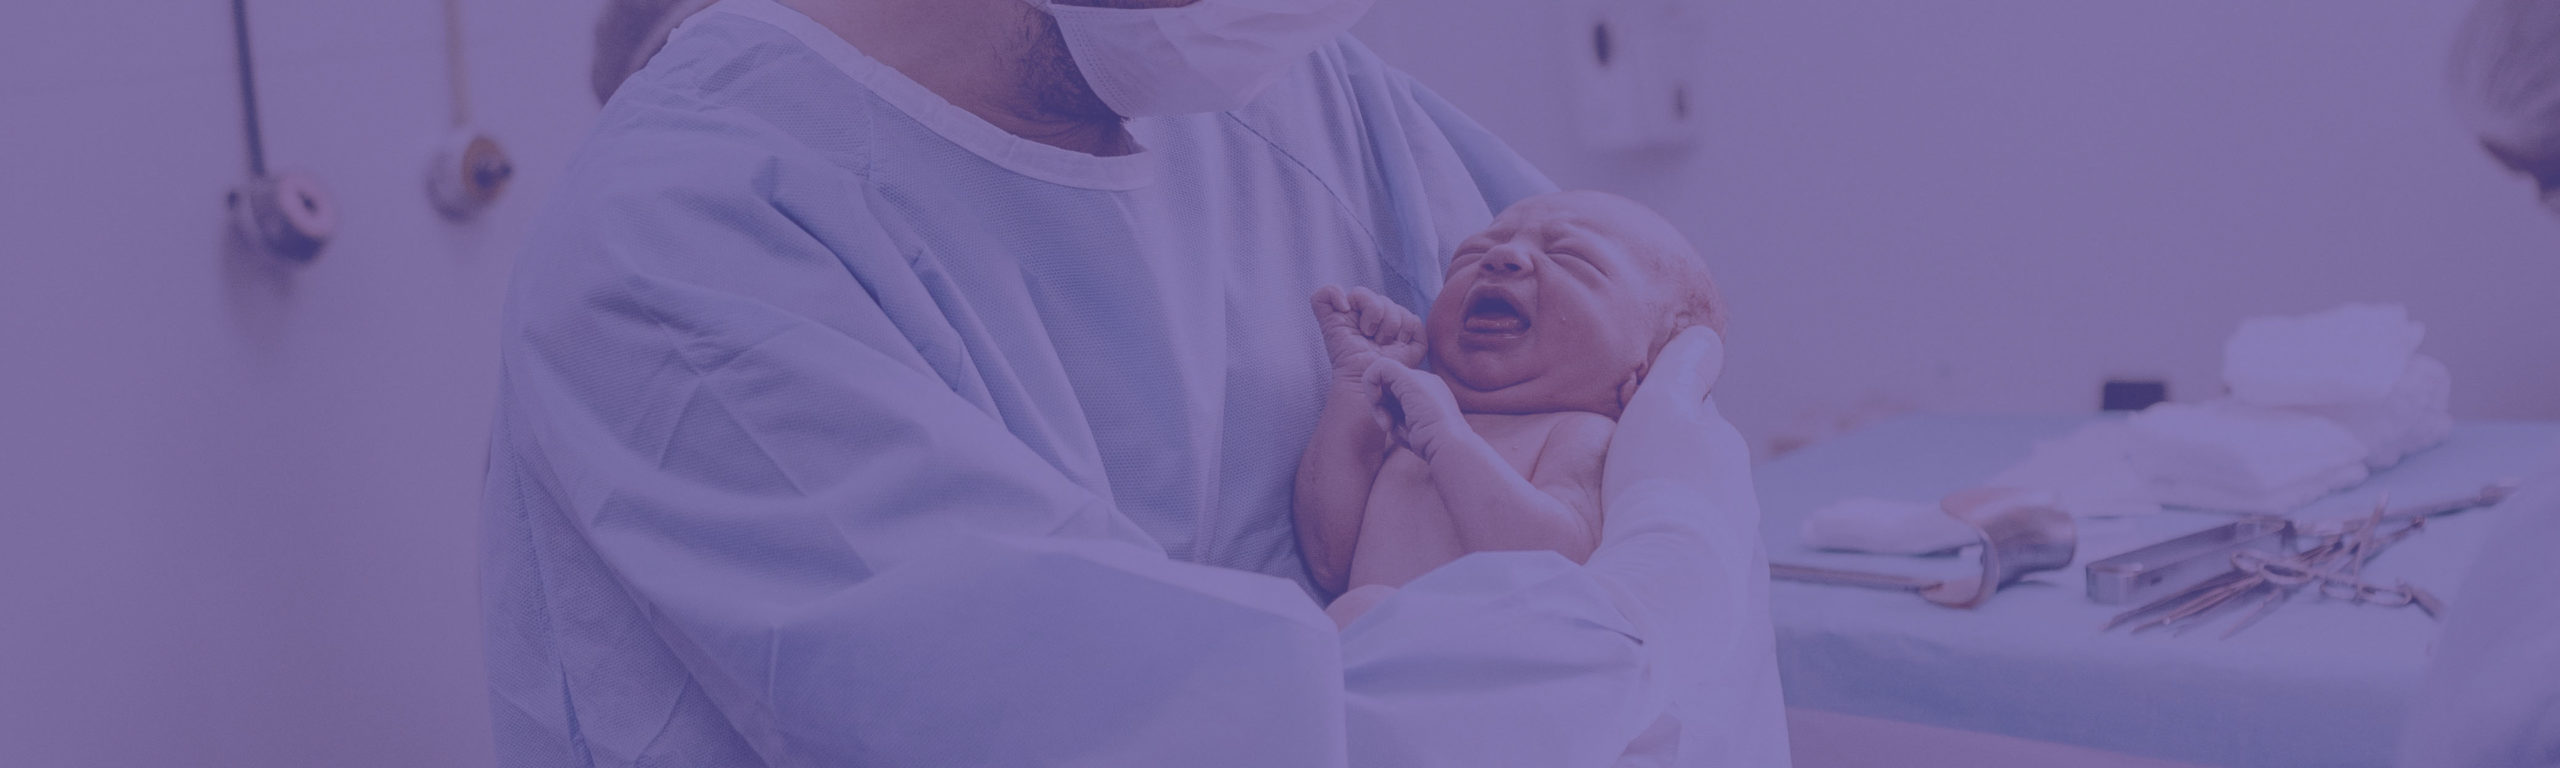 man in hospital scrubs holding a new born baby